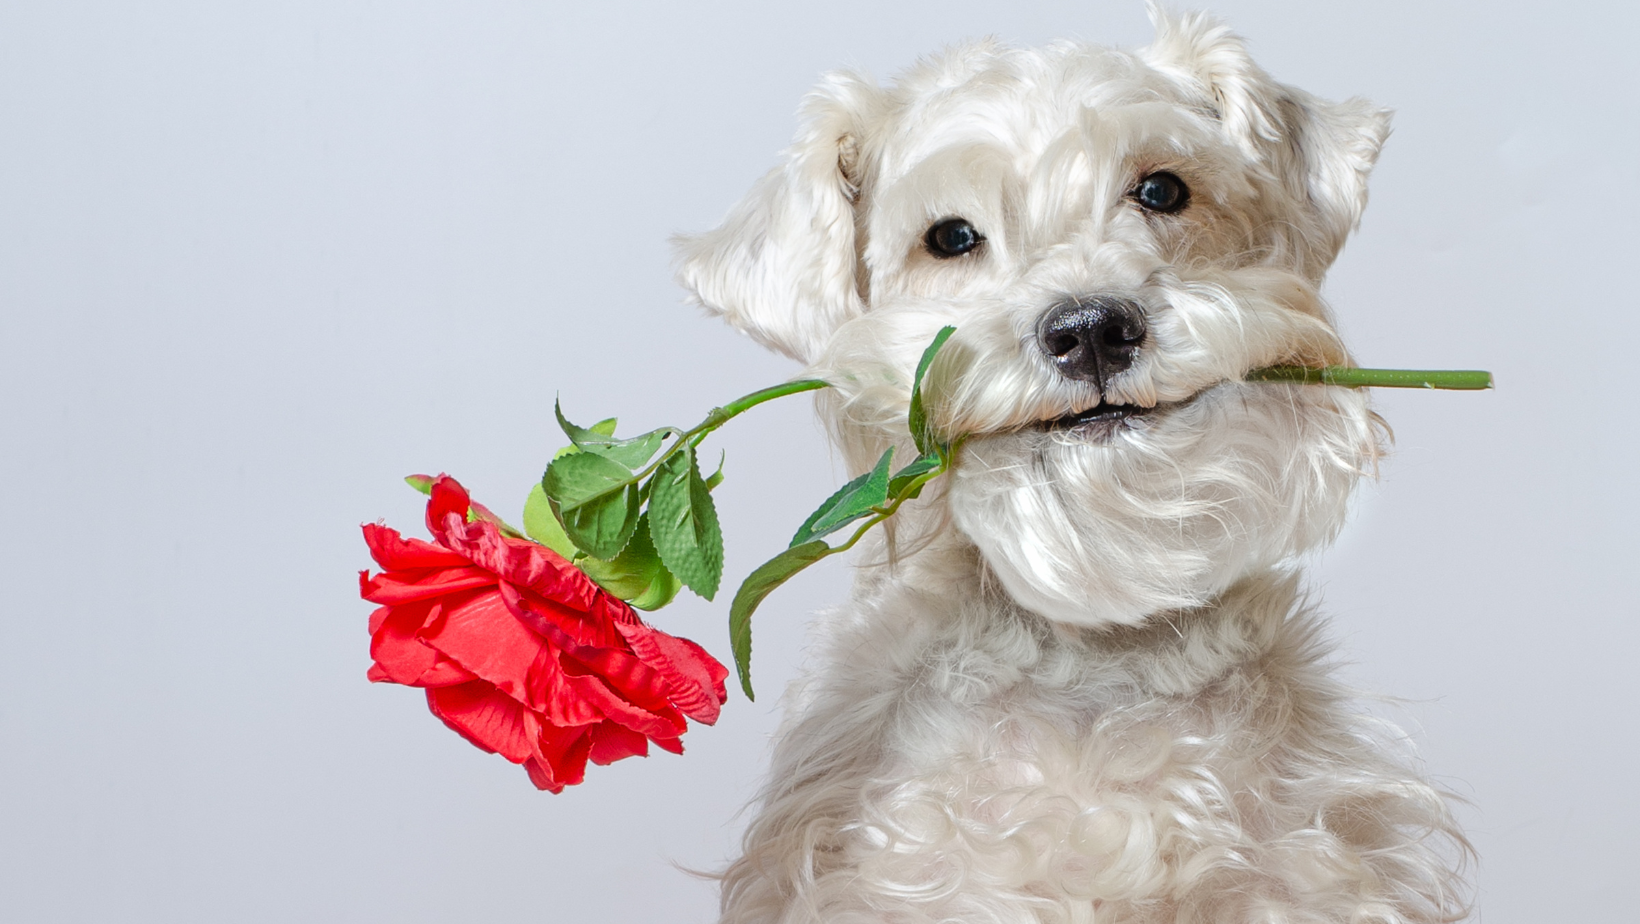 Broward County Animal Care Holds 'Stinky Ex' Fundraiser for Valentine's Day 2